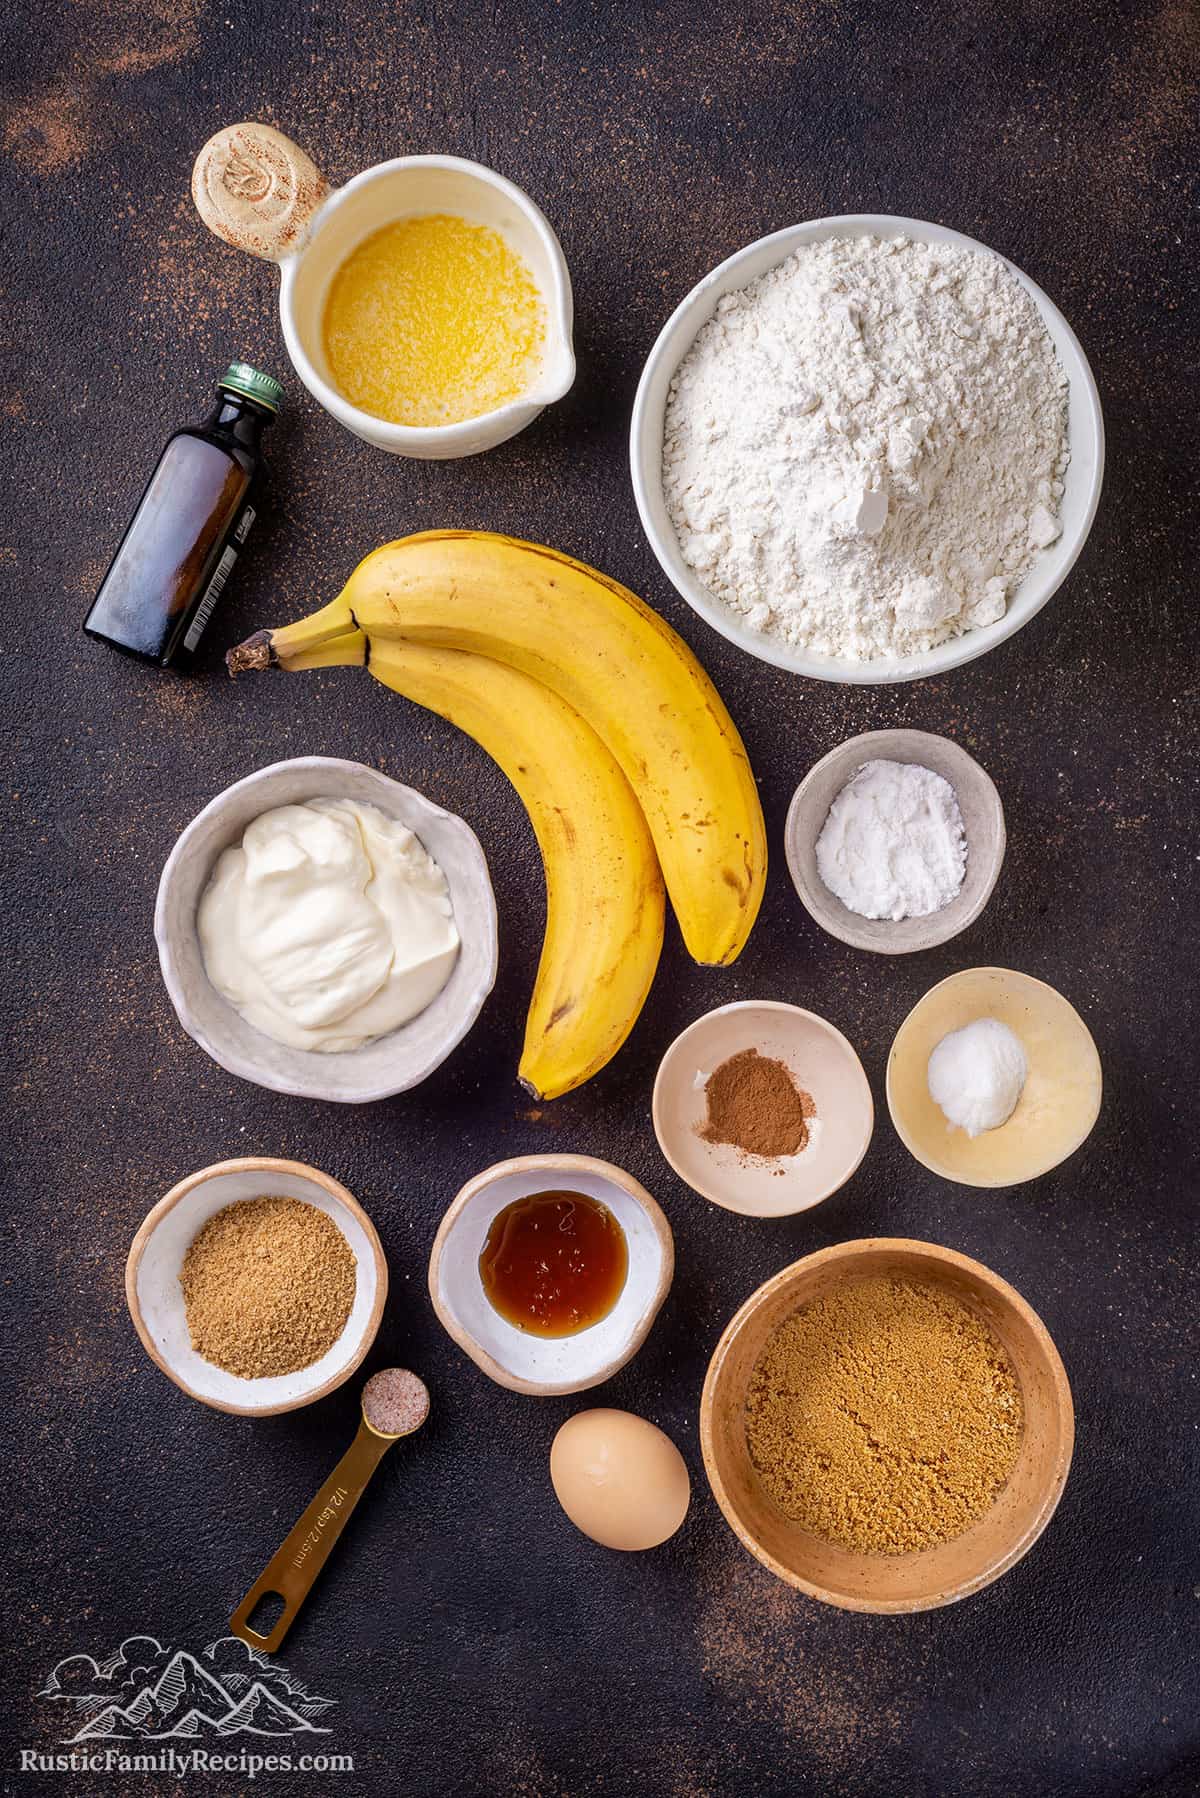 The ingredients for banana bread muffins.